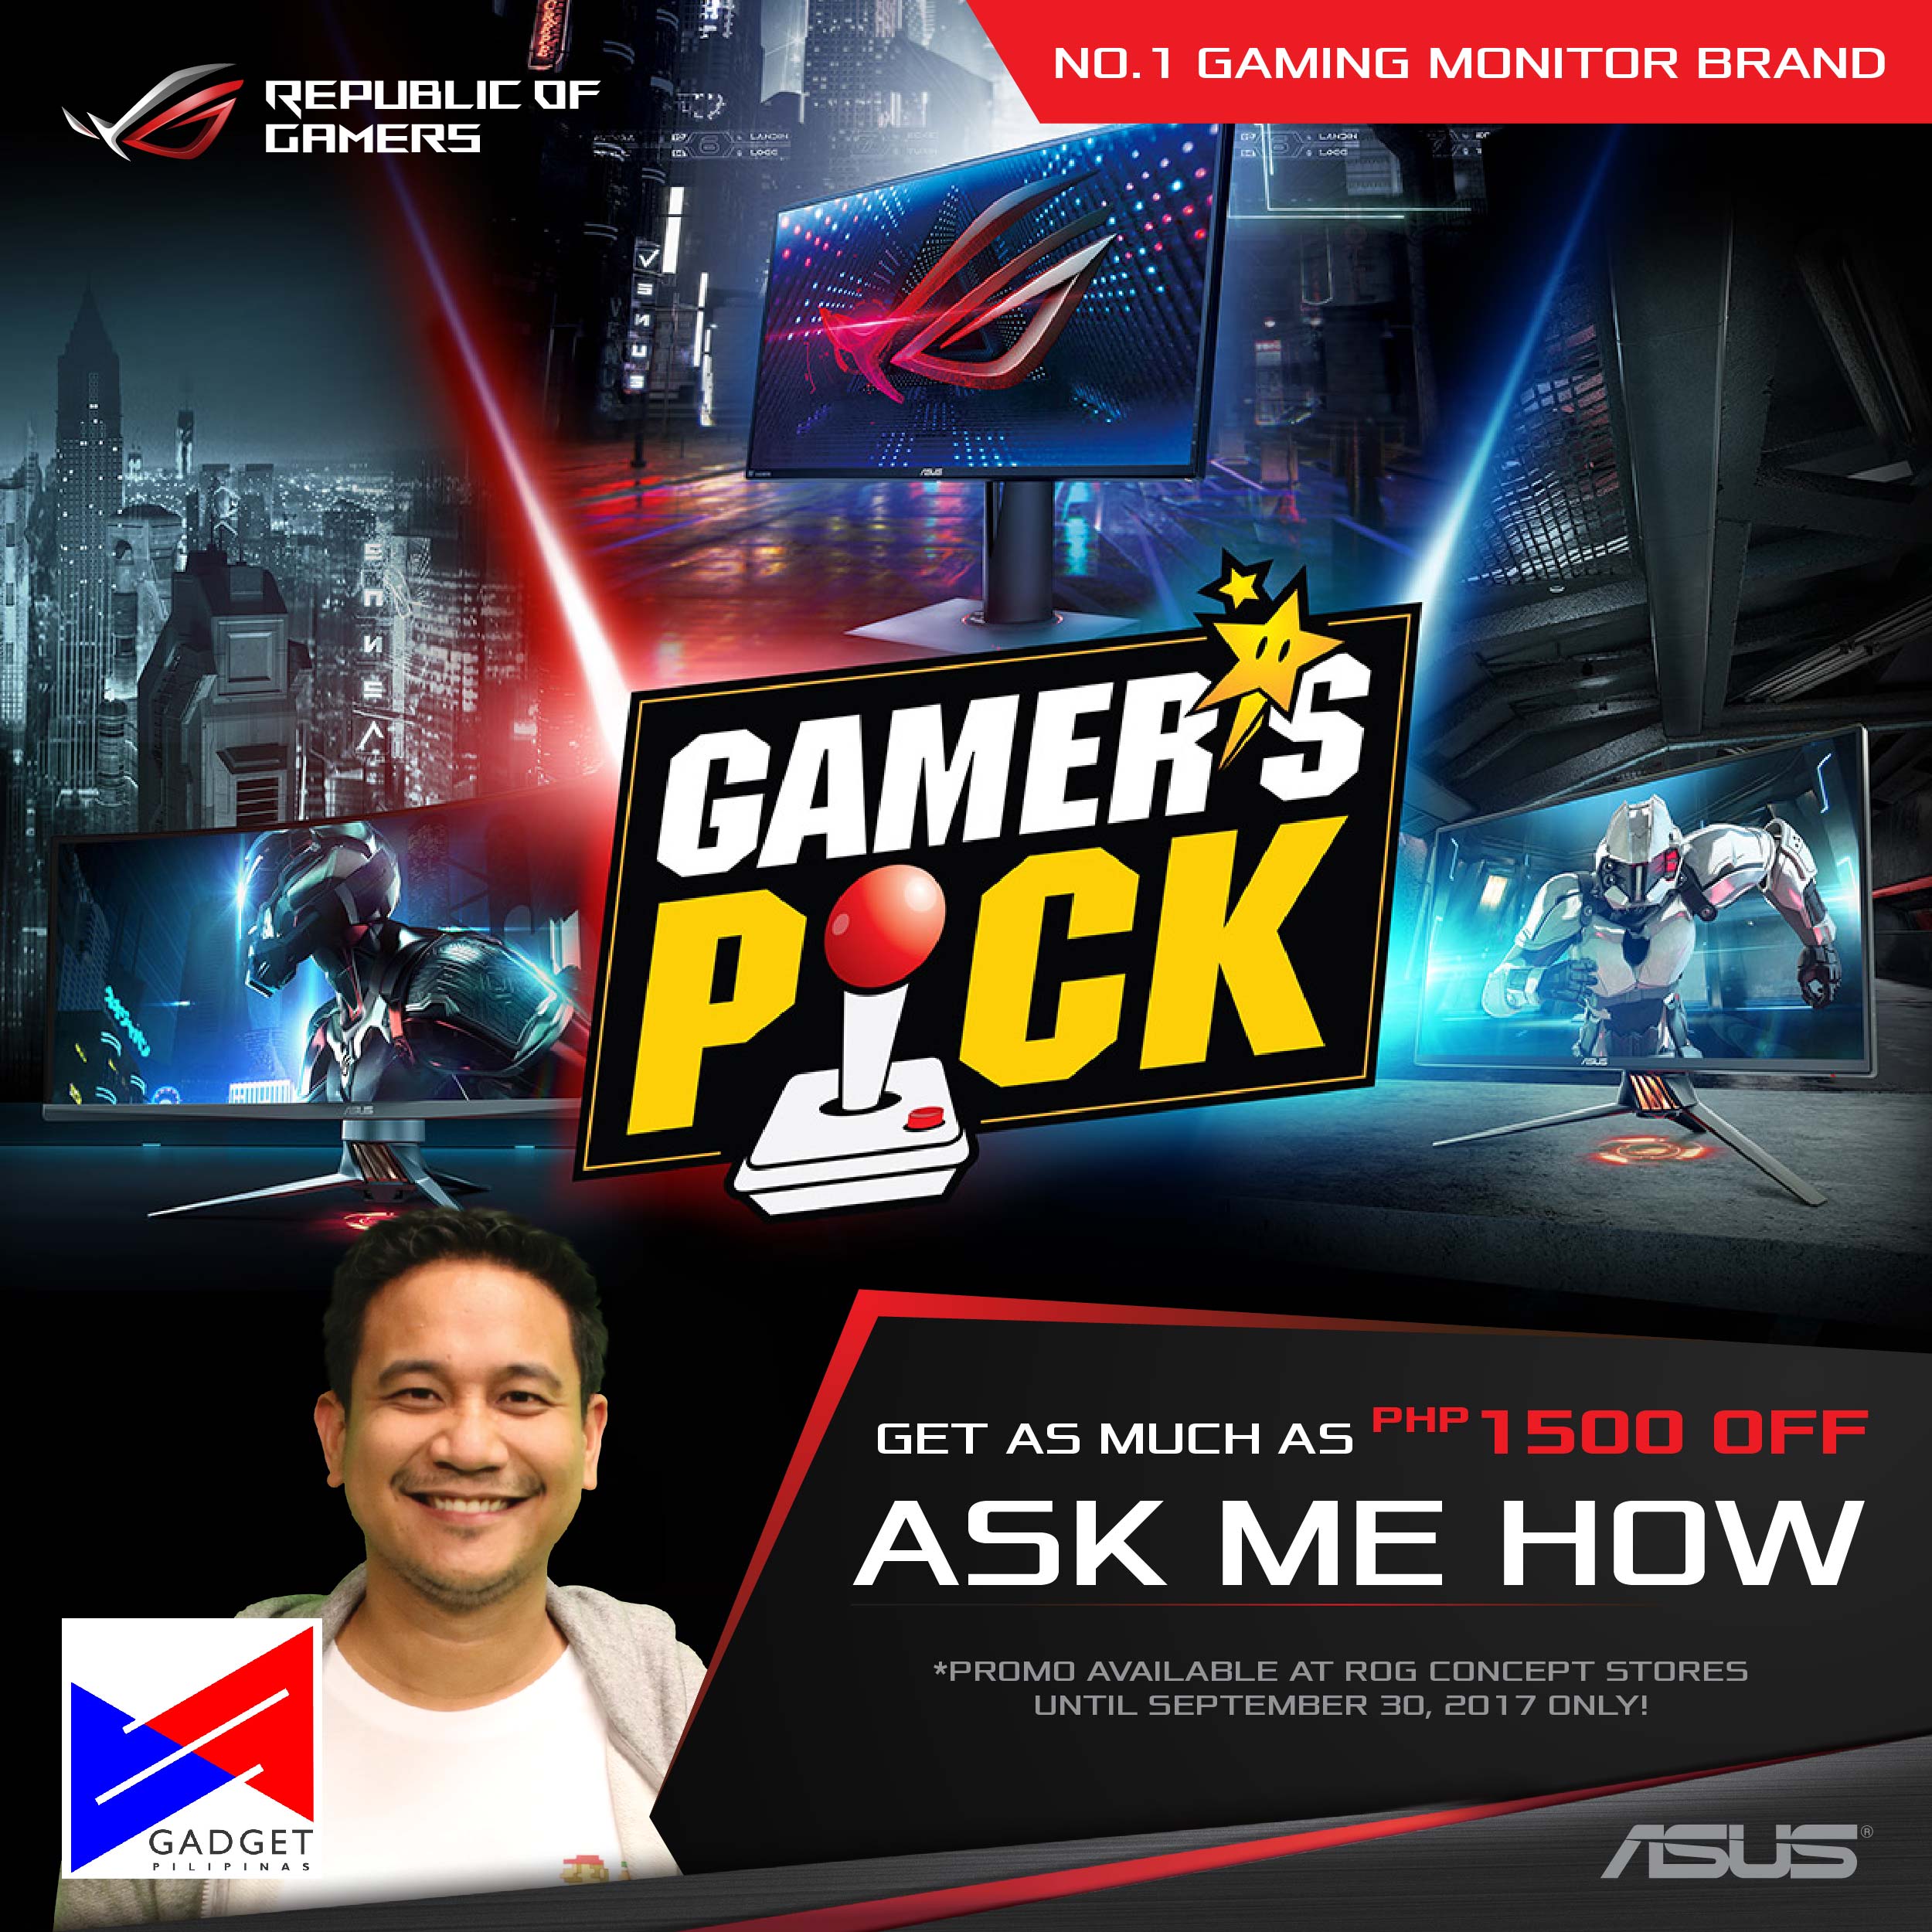 Get as much as PhP1500 discount with this ASUS ROG Gaming Monitor Promo